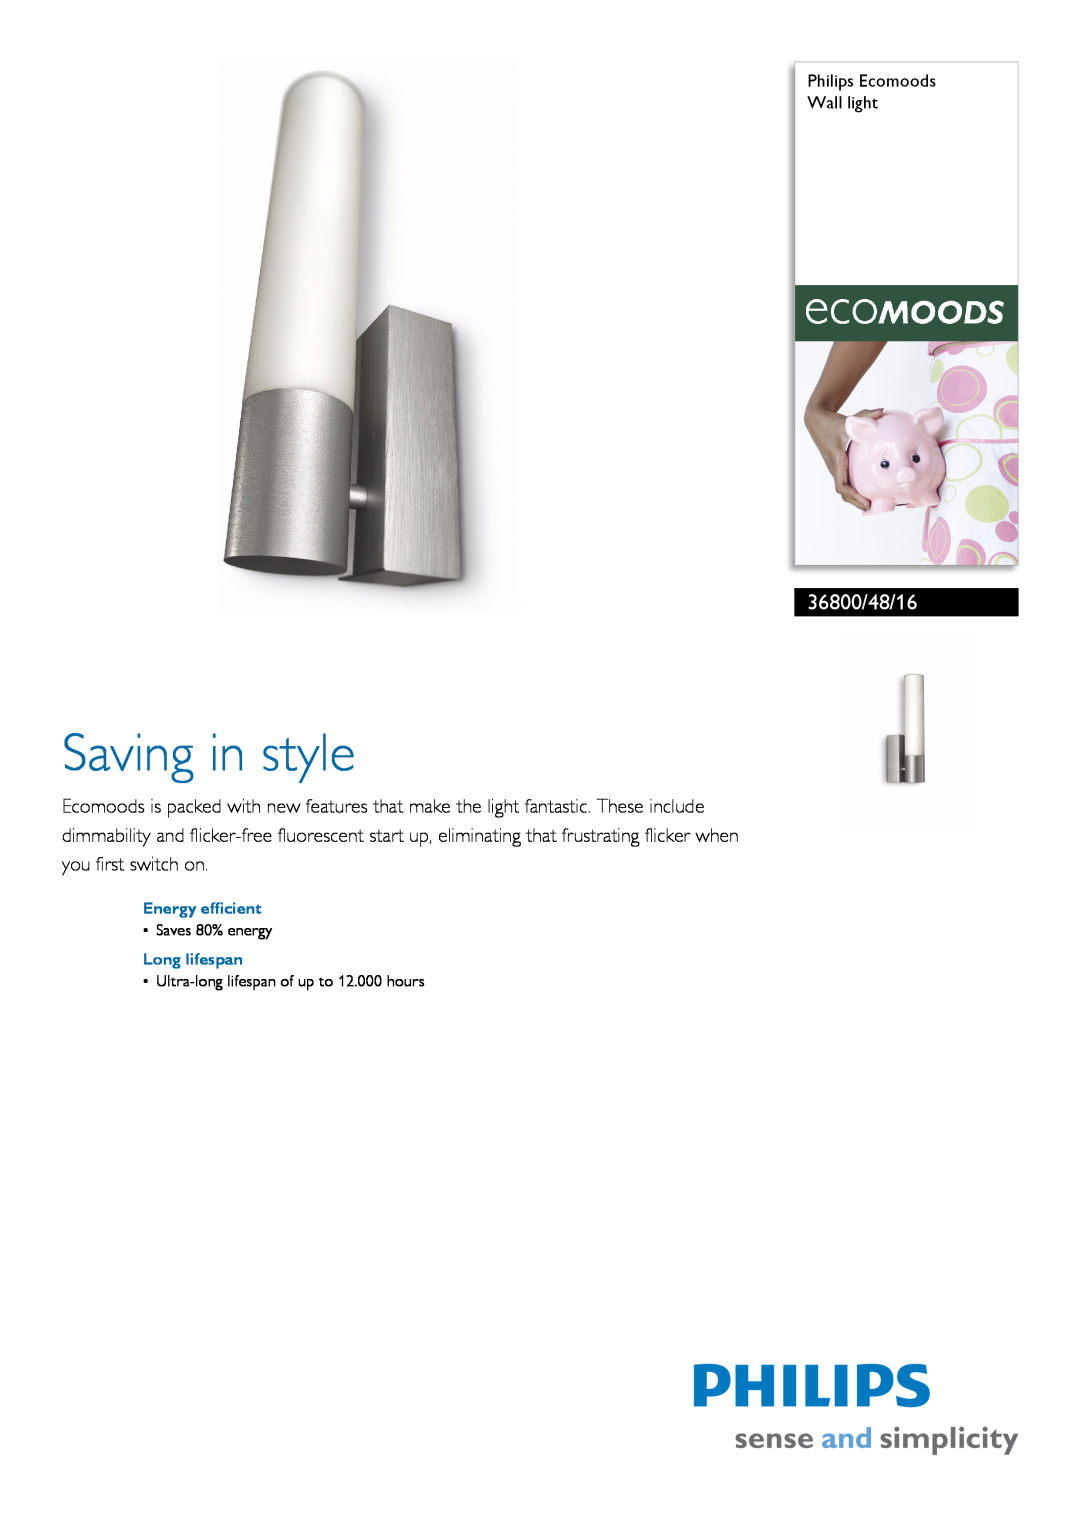 Philips 36800/48/16 manual Philips Ecomoods Wall light, Energy efficient, Long lifespan, Saving in style, Saves 80% energy 